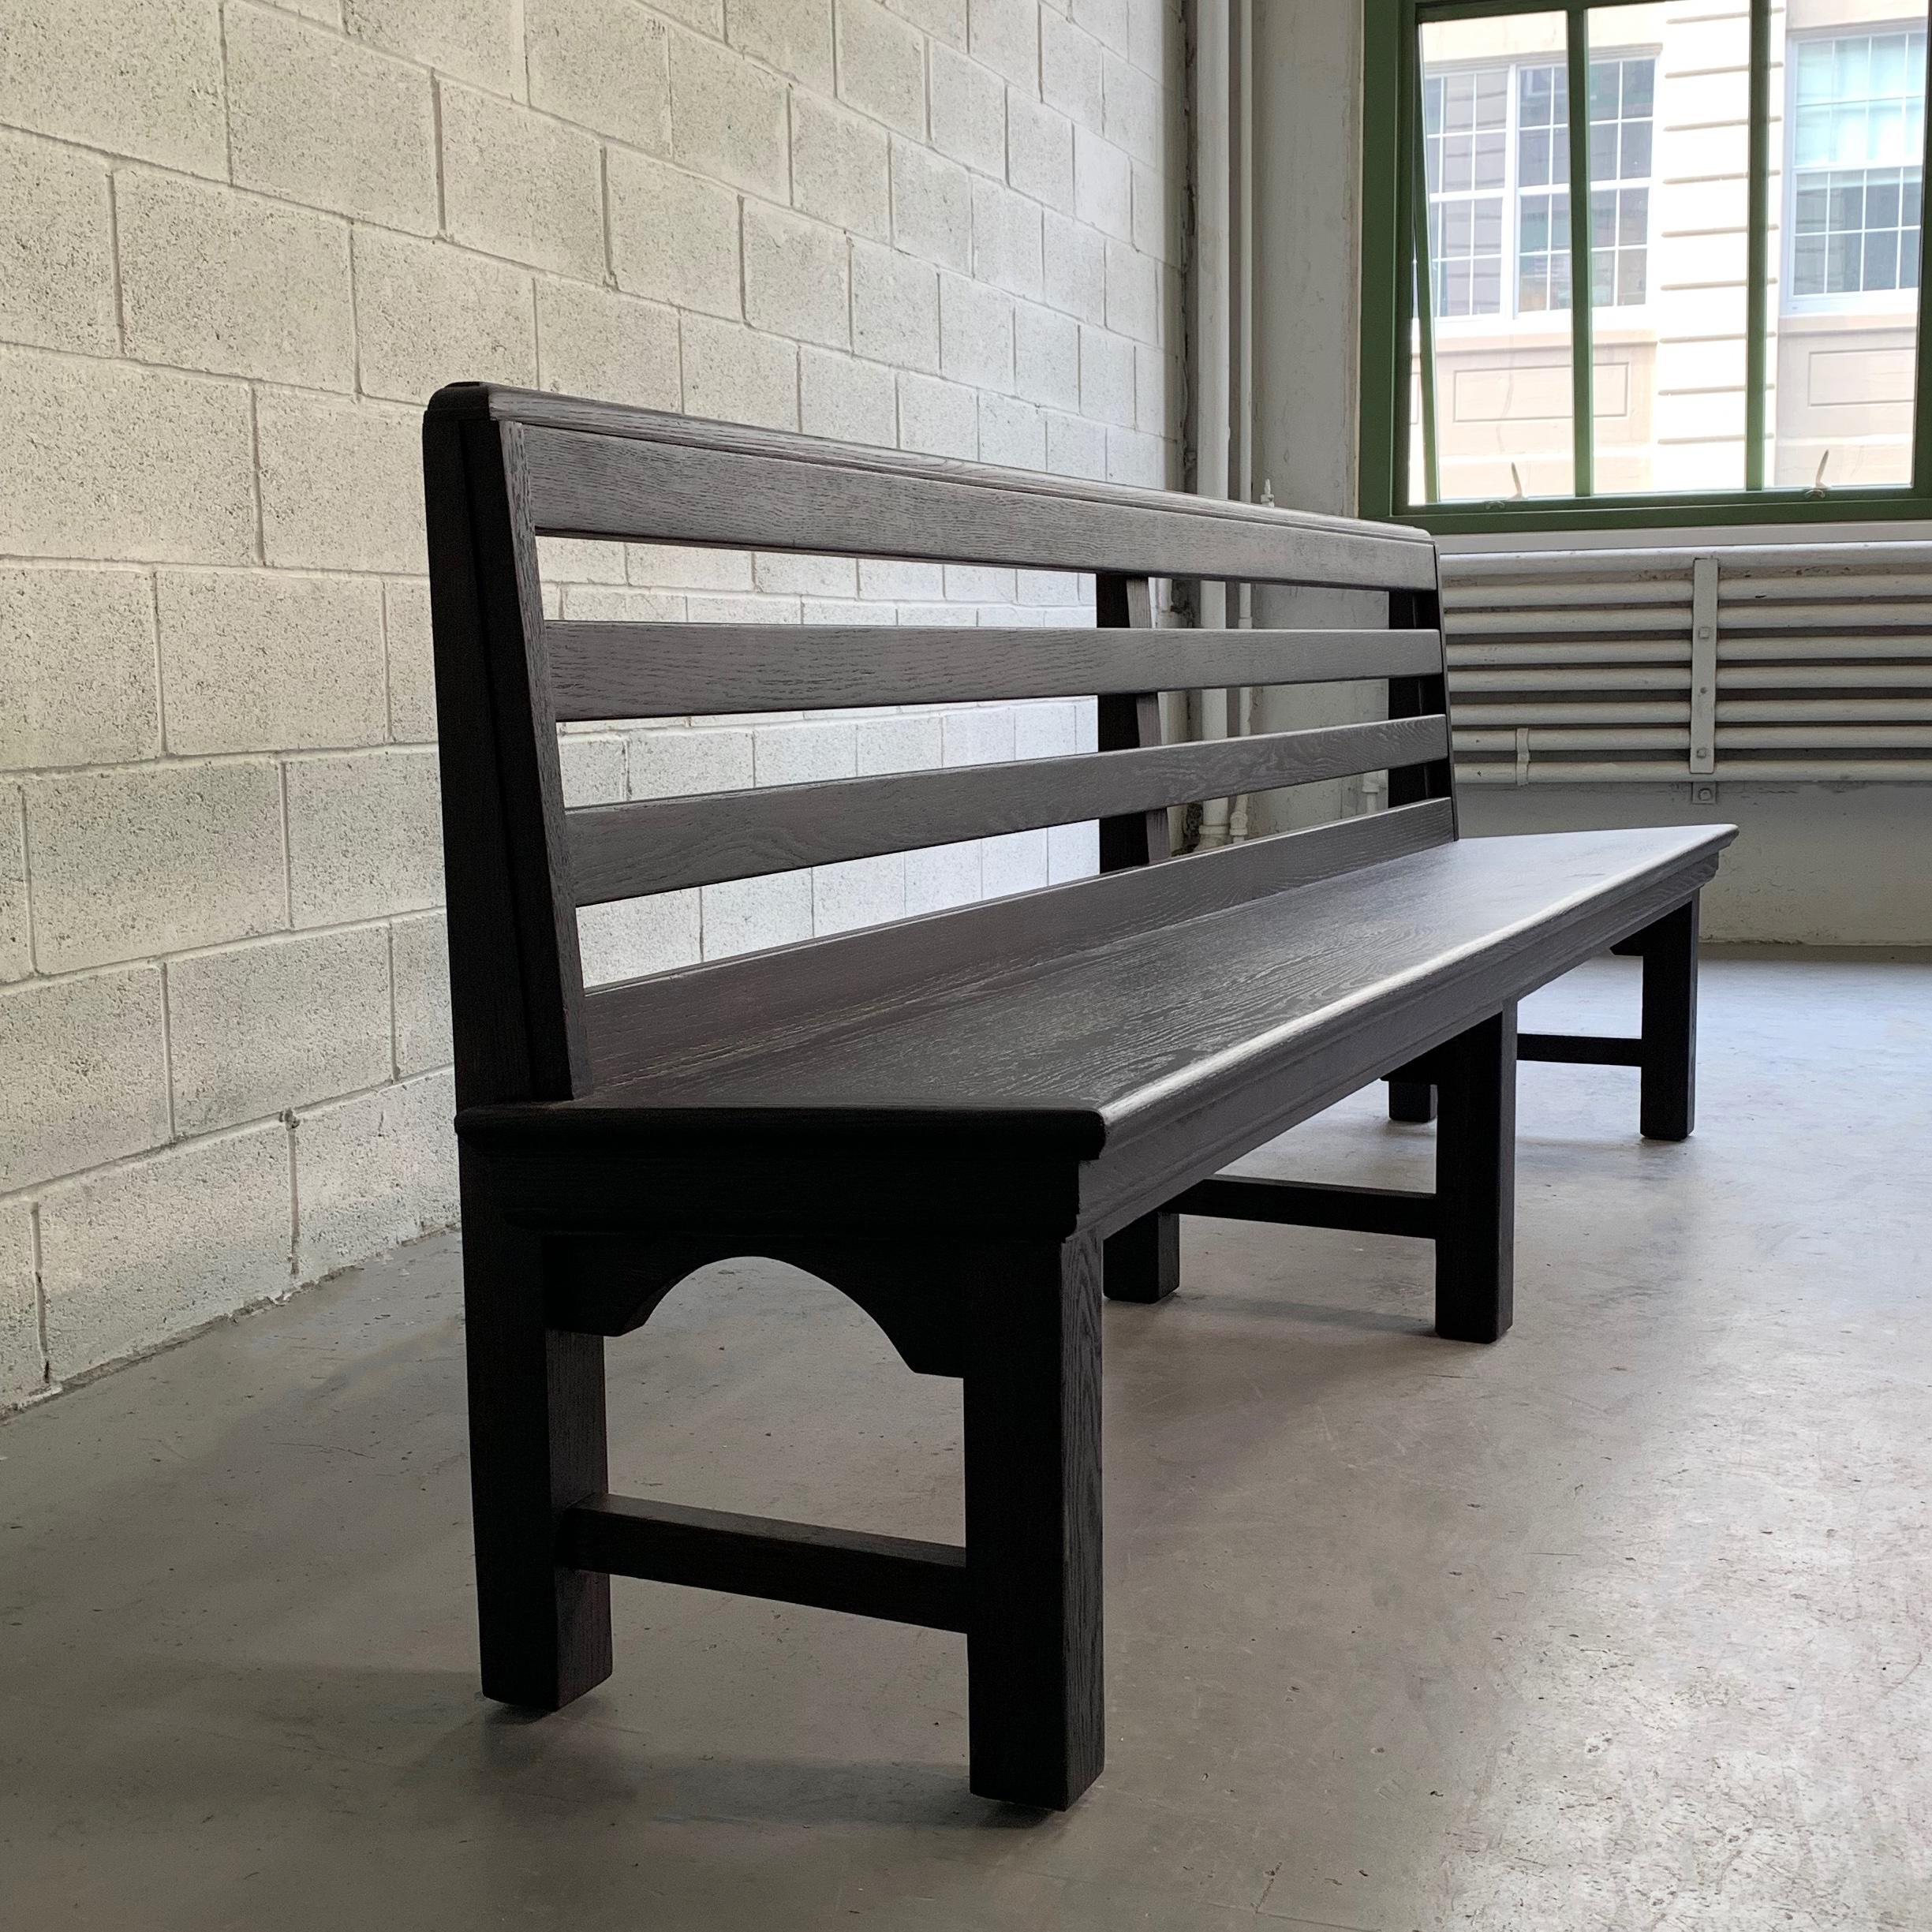 train station benches for sale